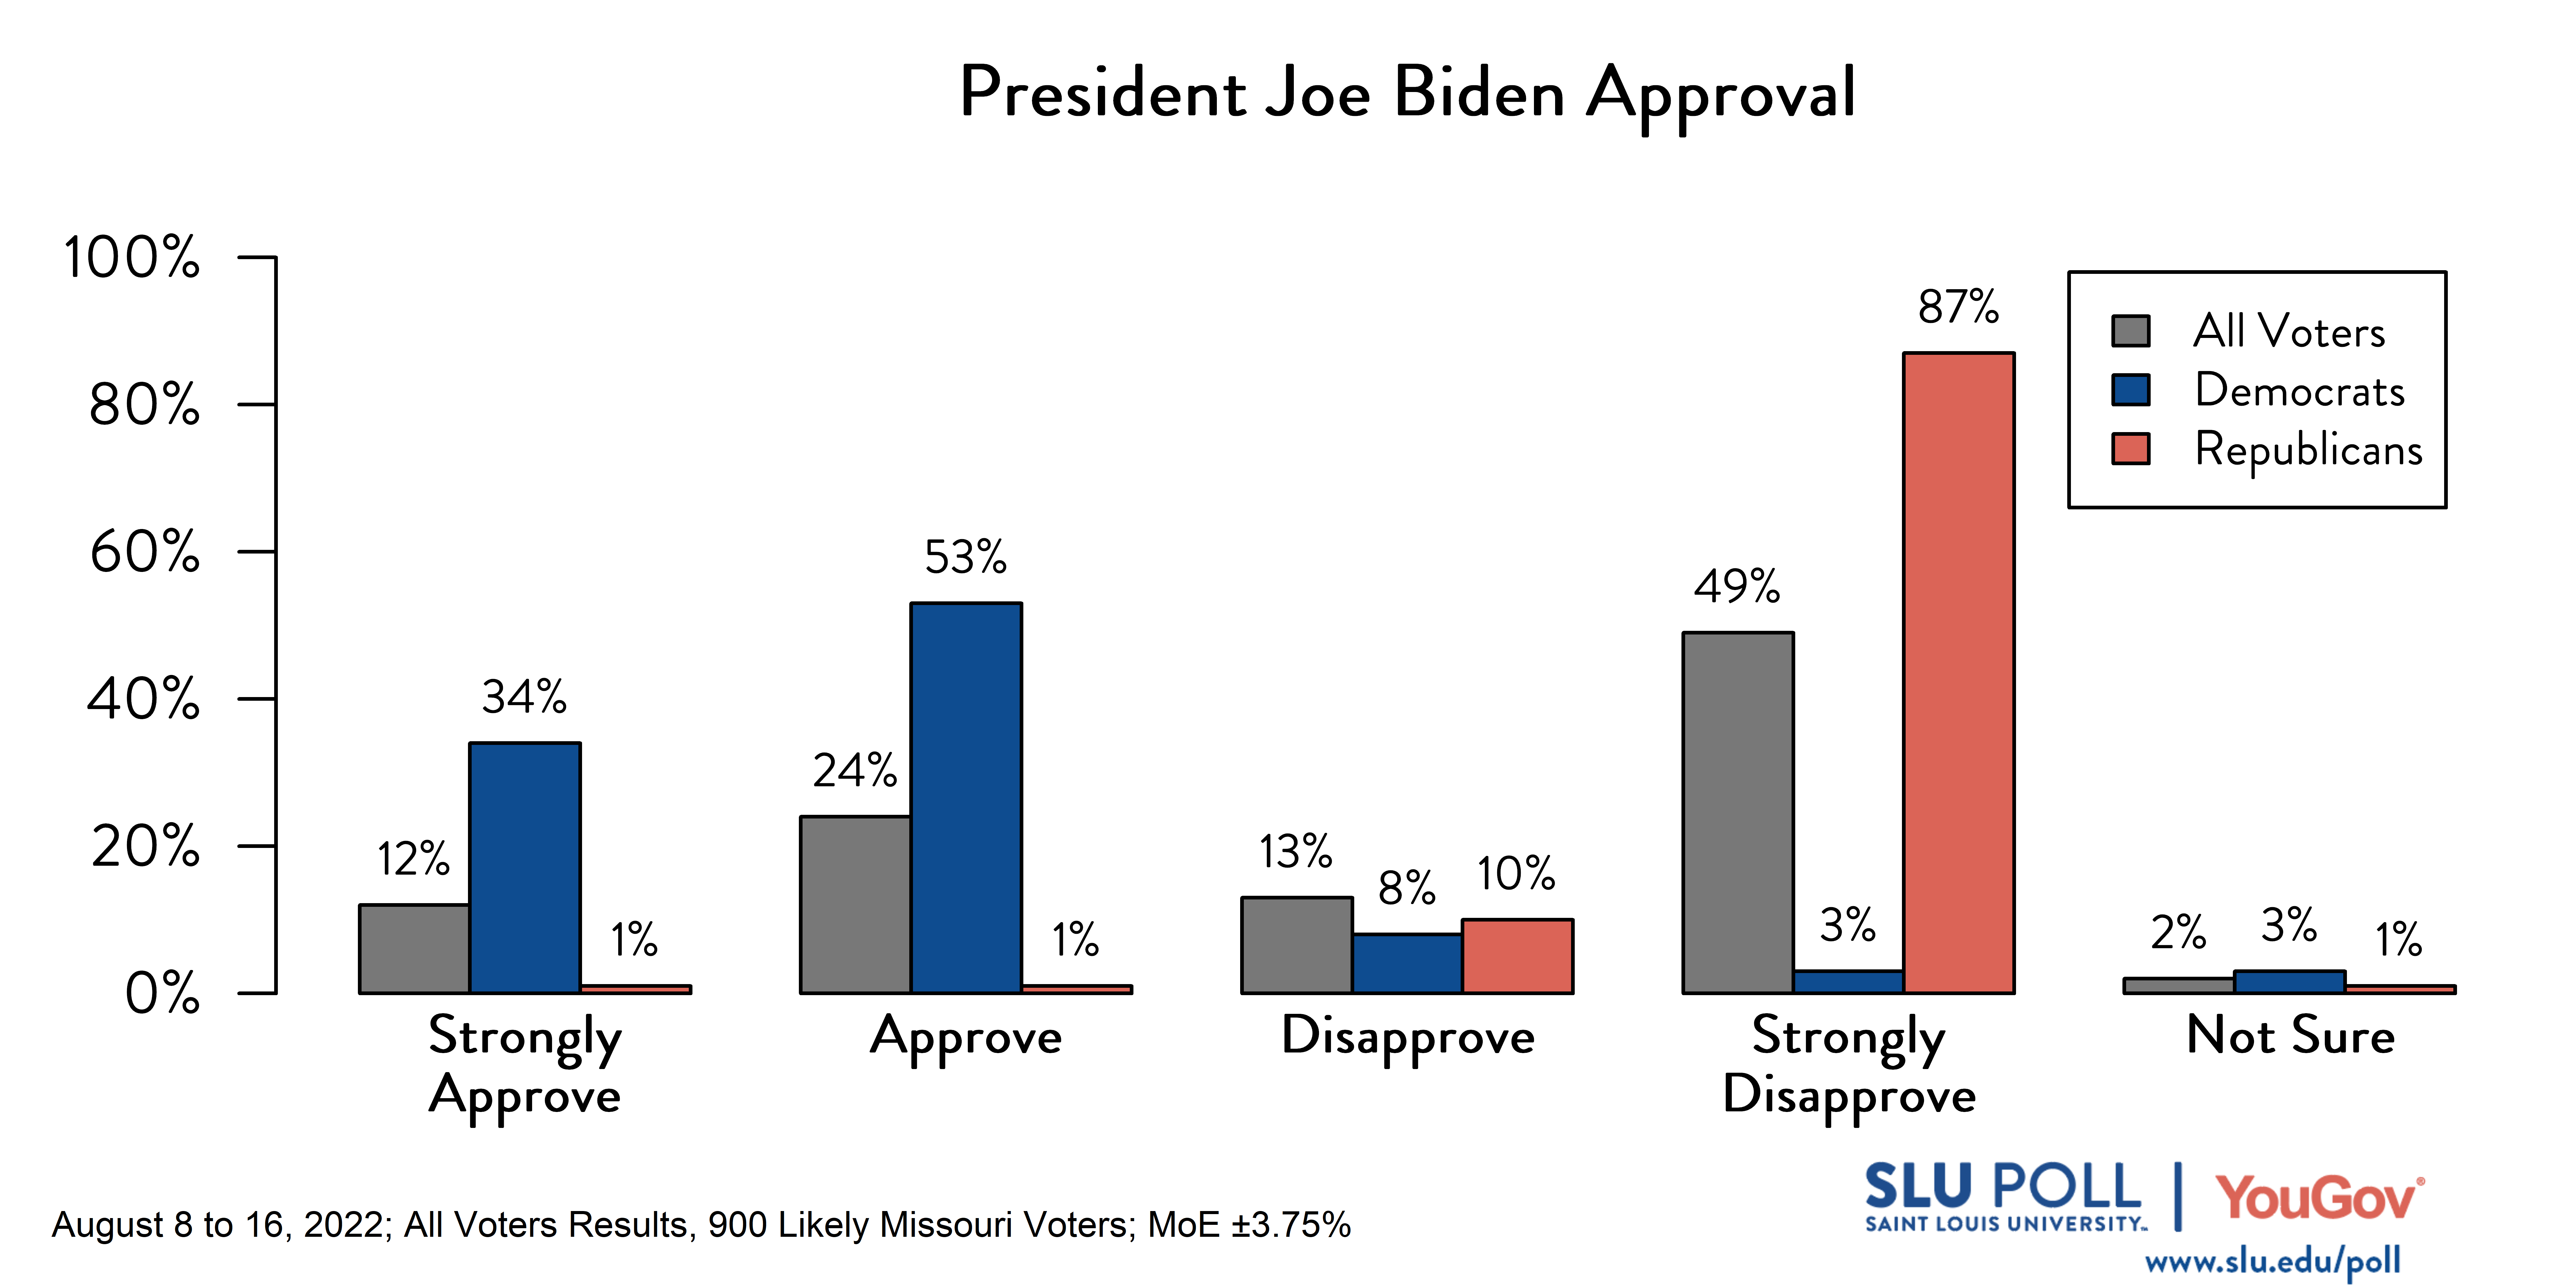 Likely voters' responses to 'Do you approve or disapprove of the way each is doing their job: President Joe Biden?': 12% Strongly approve, 24% Approve, 13% Disapprove, 49% Strongly disapprove, and 2% Not sure. Democratic voters' responses: ' 34% Strongly approve, 53% Approve, 8% Disapprove, 3% Strongly disapprove, and 3% Not sure. Republican voters' responses: 1% Strongly approve, 1% Approve, 10% Disapprove, 87% Strongly disapprove, and 1% Not sure. 